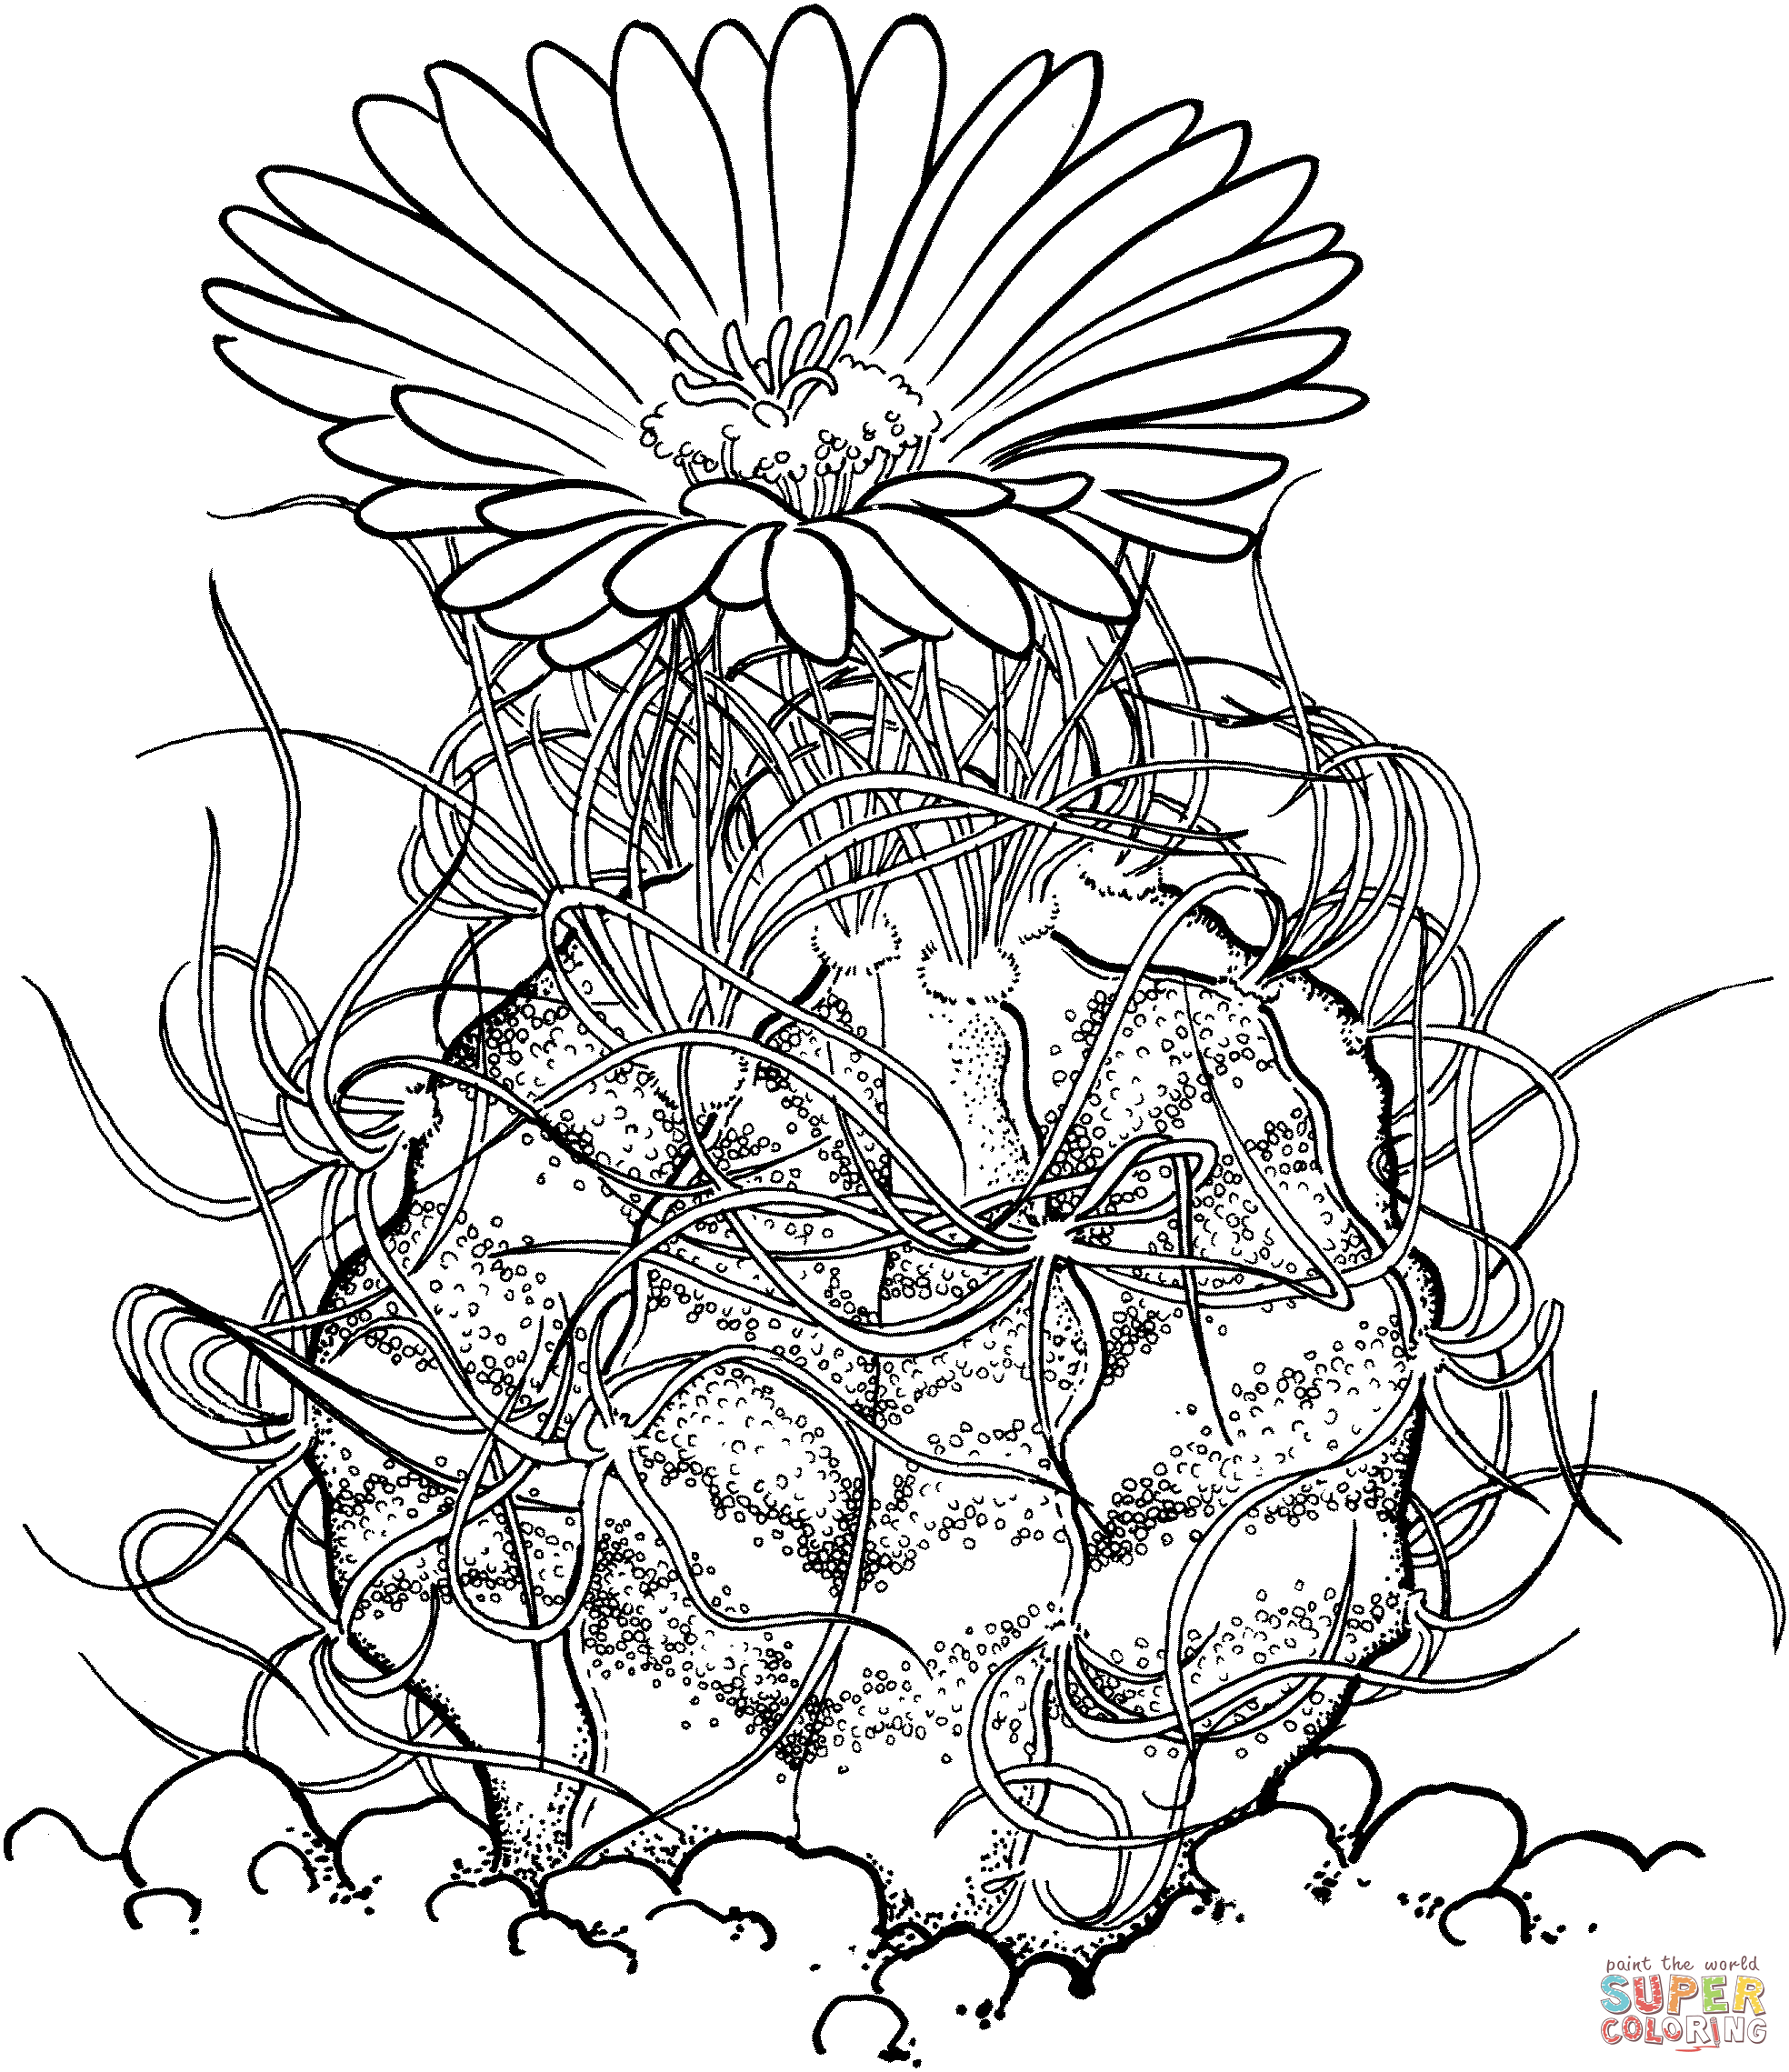 Astrophytum capricorne or goats horn cactus coloring page free printable coloring pages